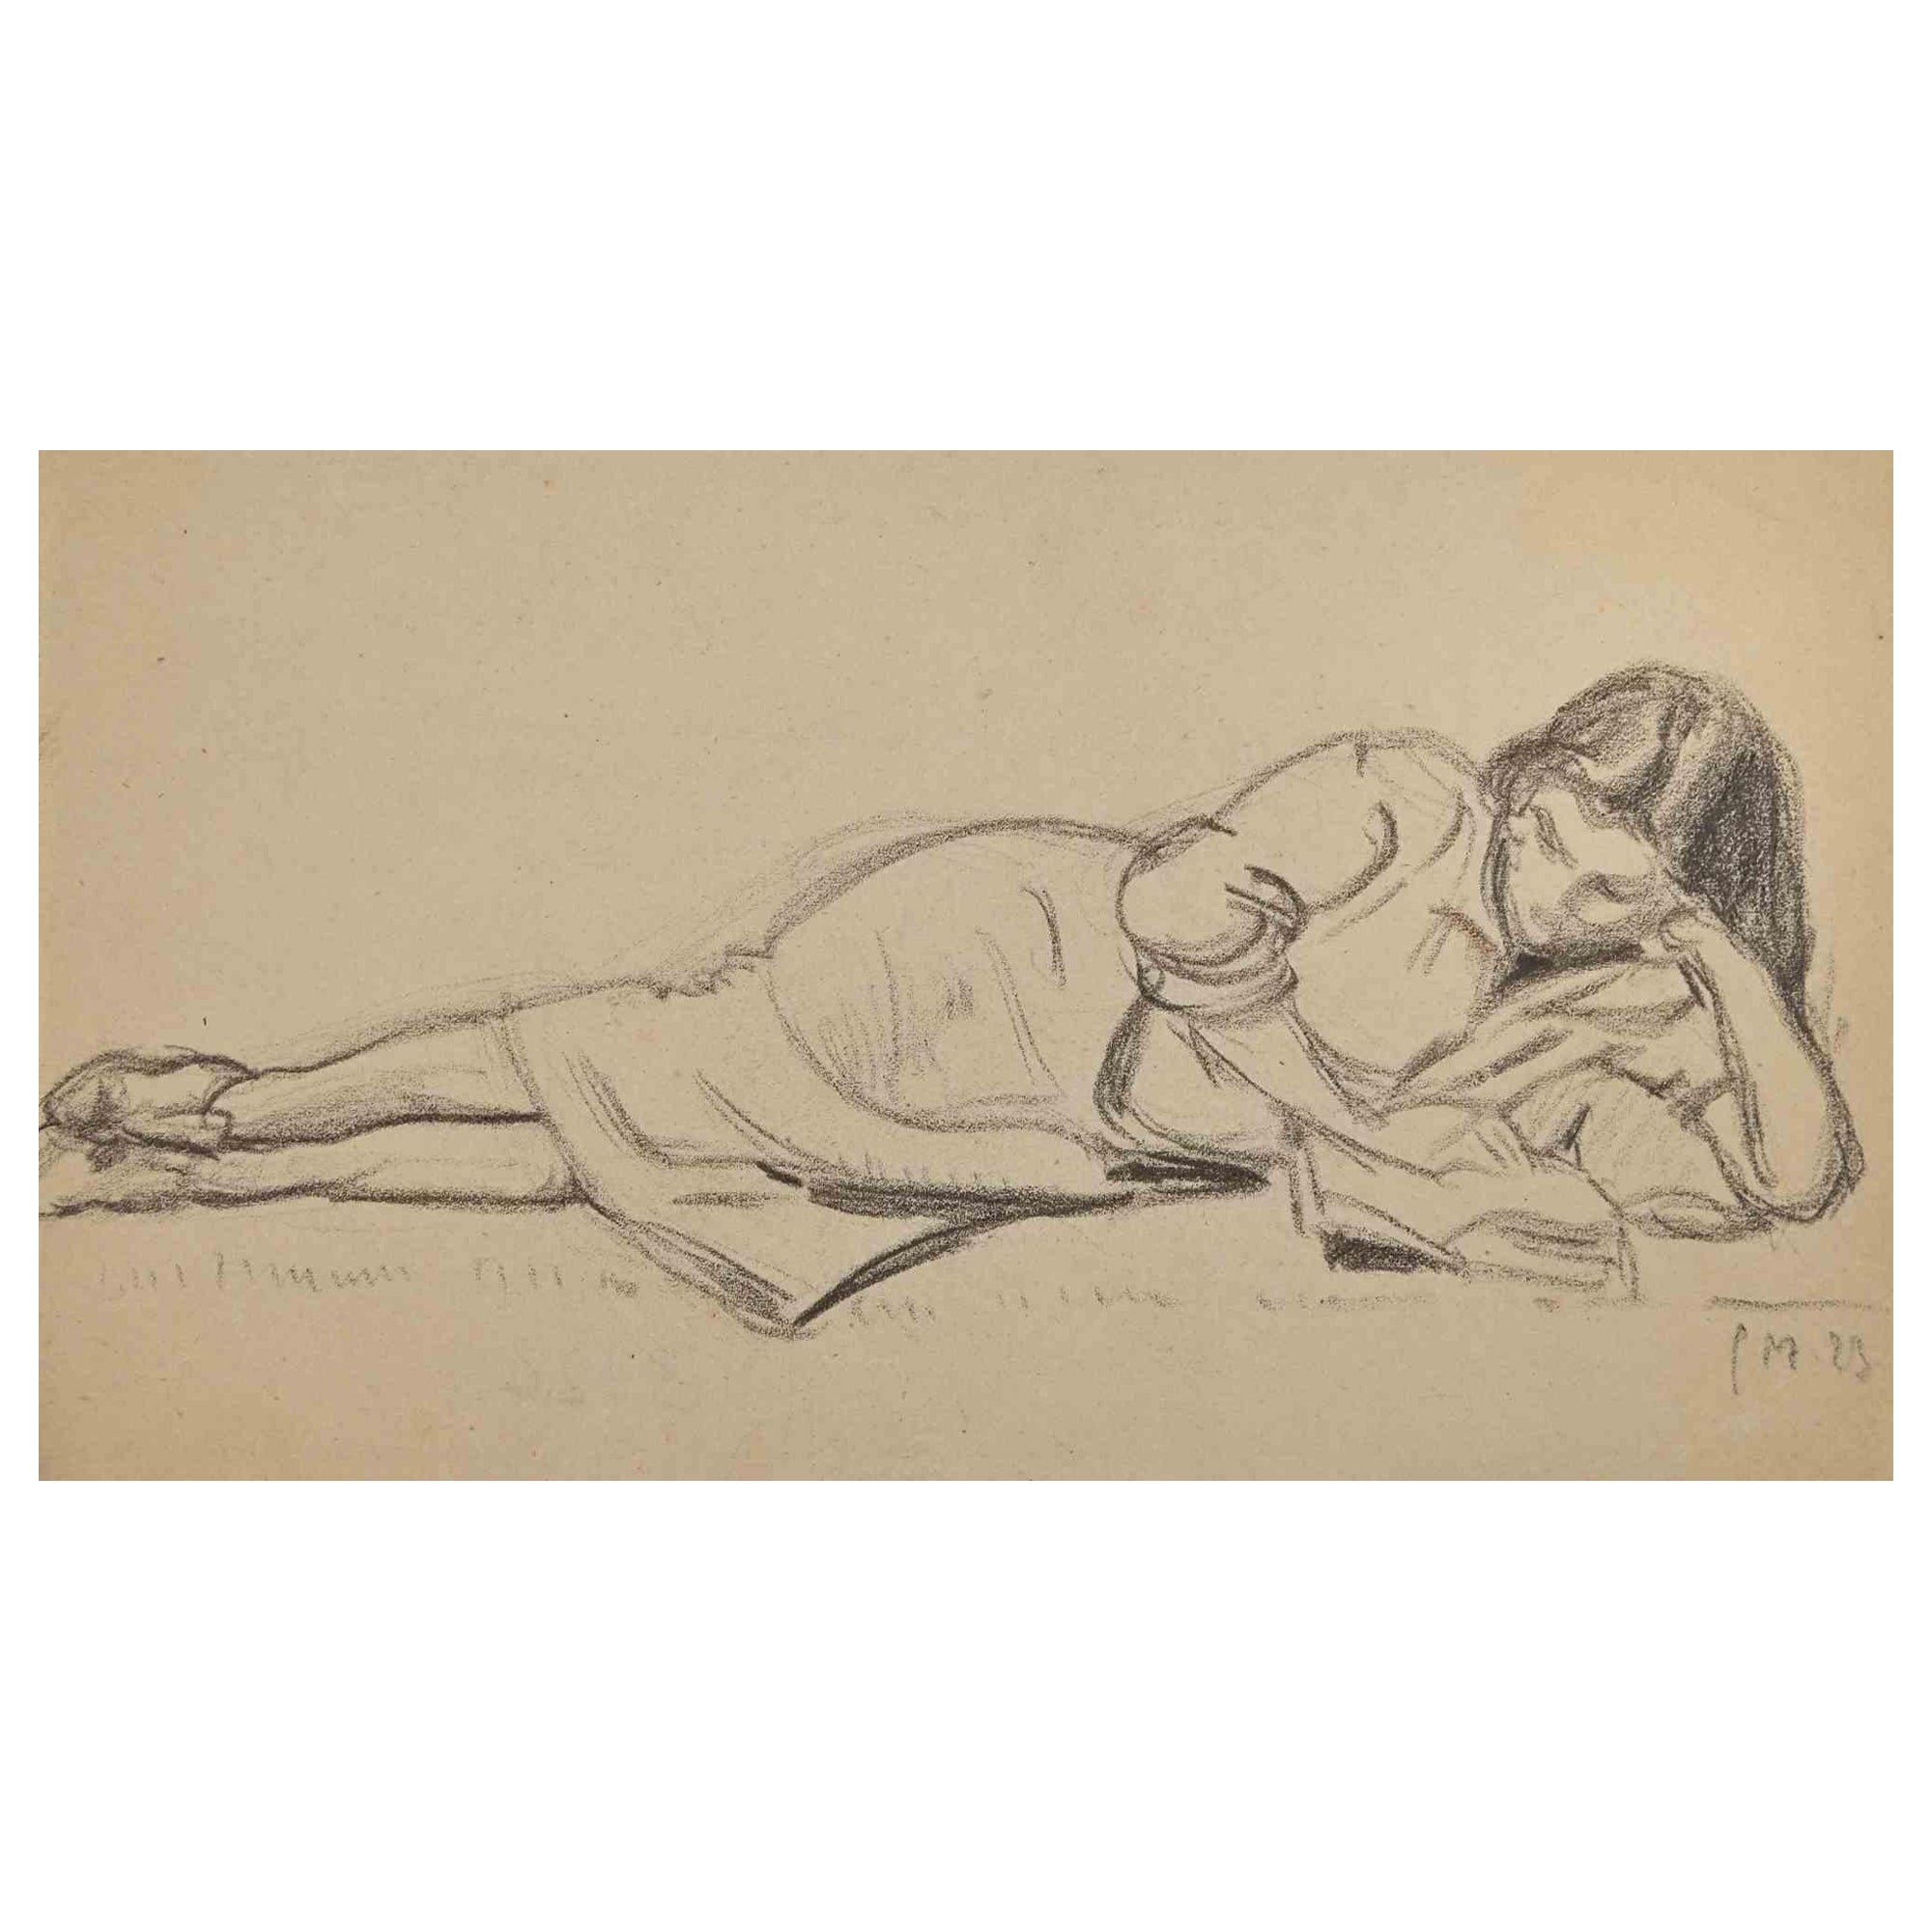 Paul Morin Portrait - The Reading Woman - Pencil Drawing - Early 20th Century